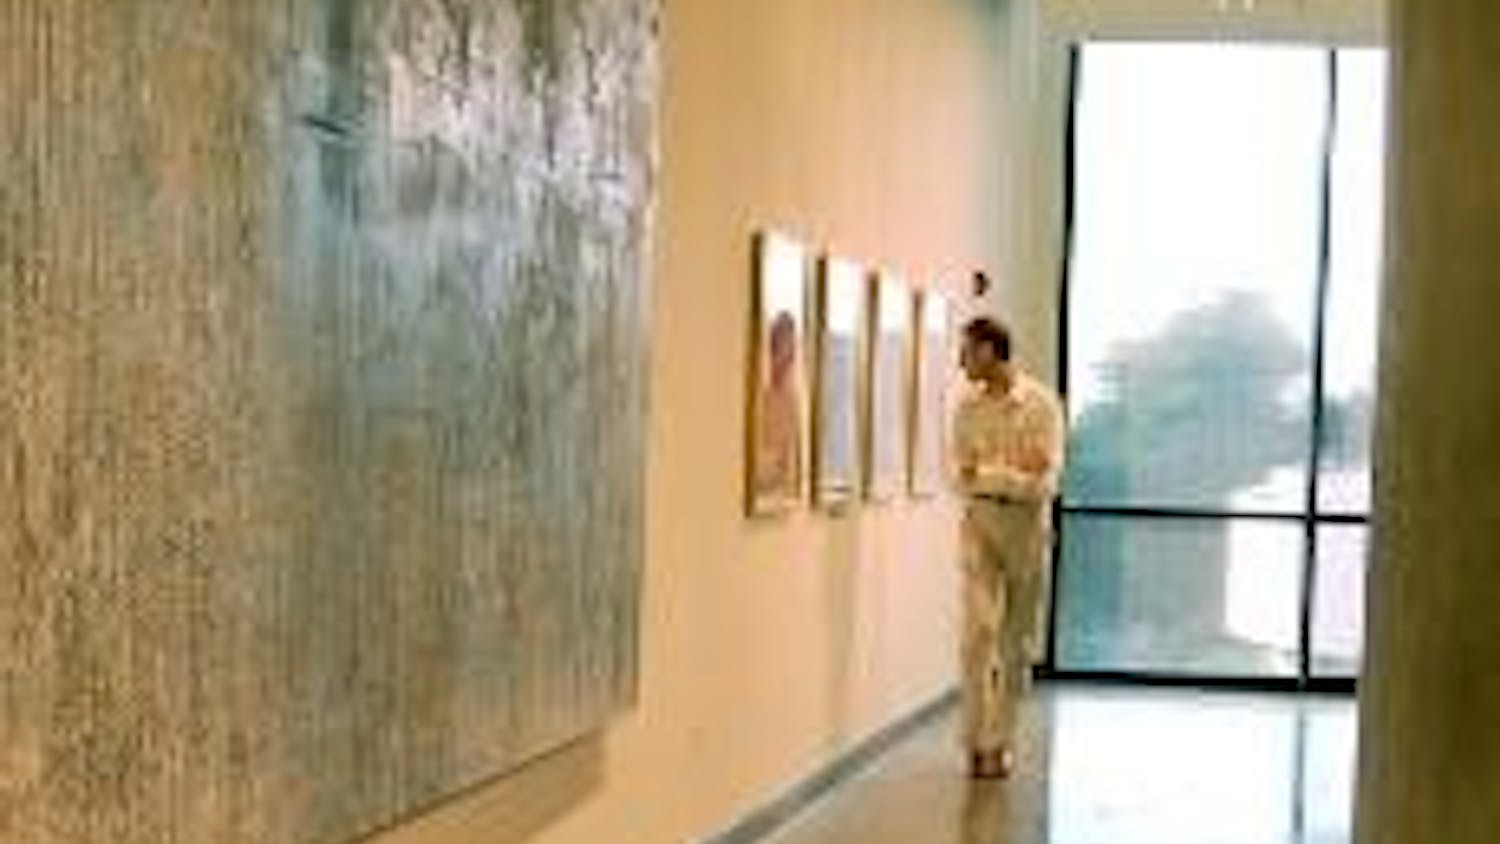 NEW ART - A visitor views the new exhibits at the Katzen Arts Center, including "All in the Family: A Juried Show of American University Alumni;" "Songs Without Words," an exhibit of photography by Sophia Tolstoy;  "Listening to Ivy;" and "Topophilia Imbu